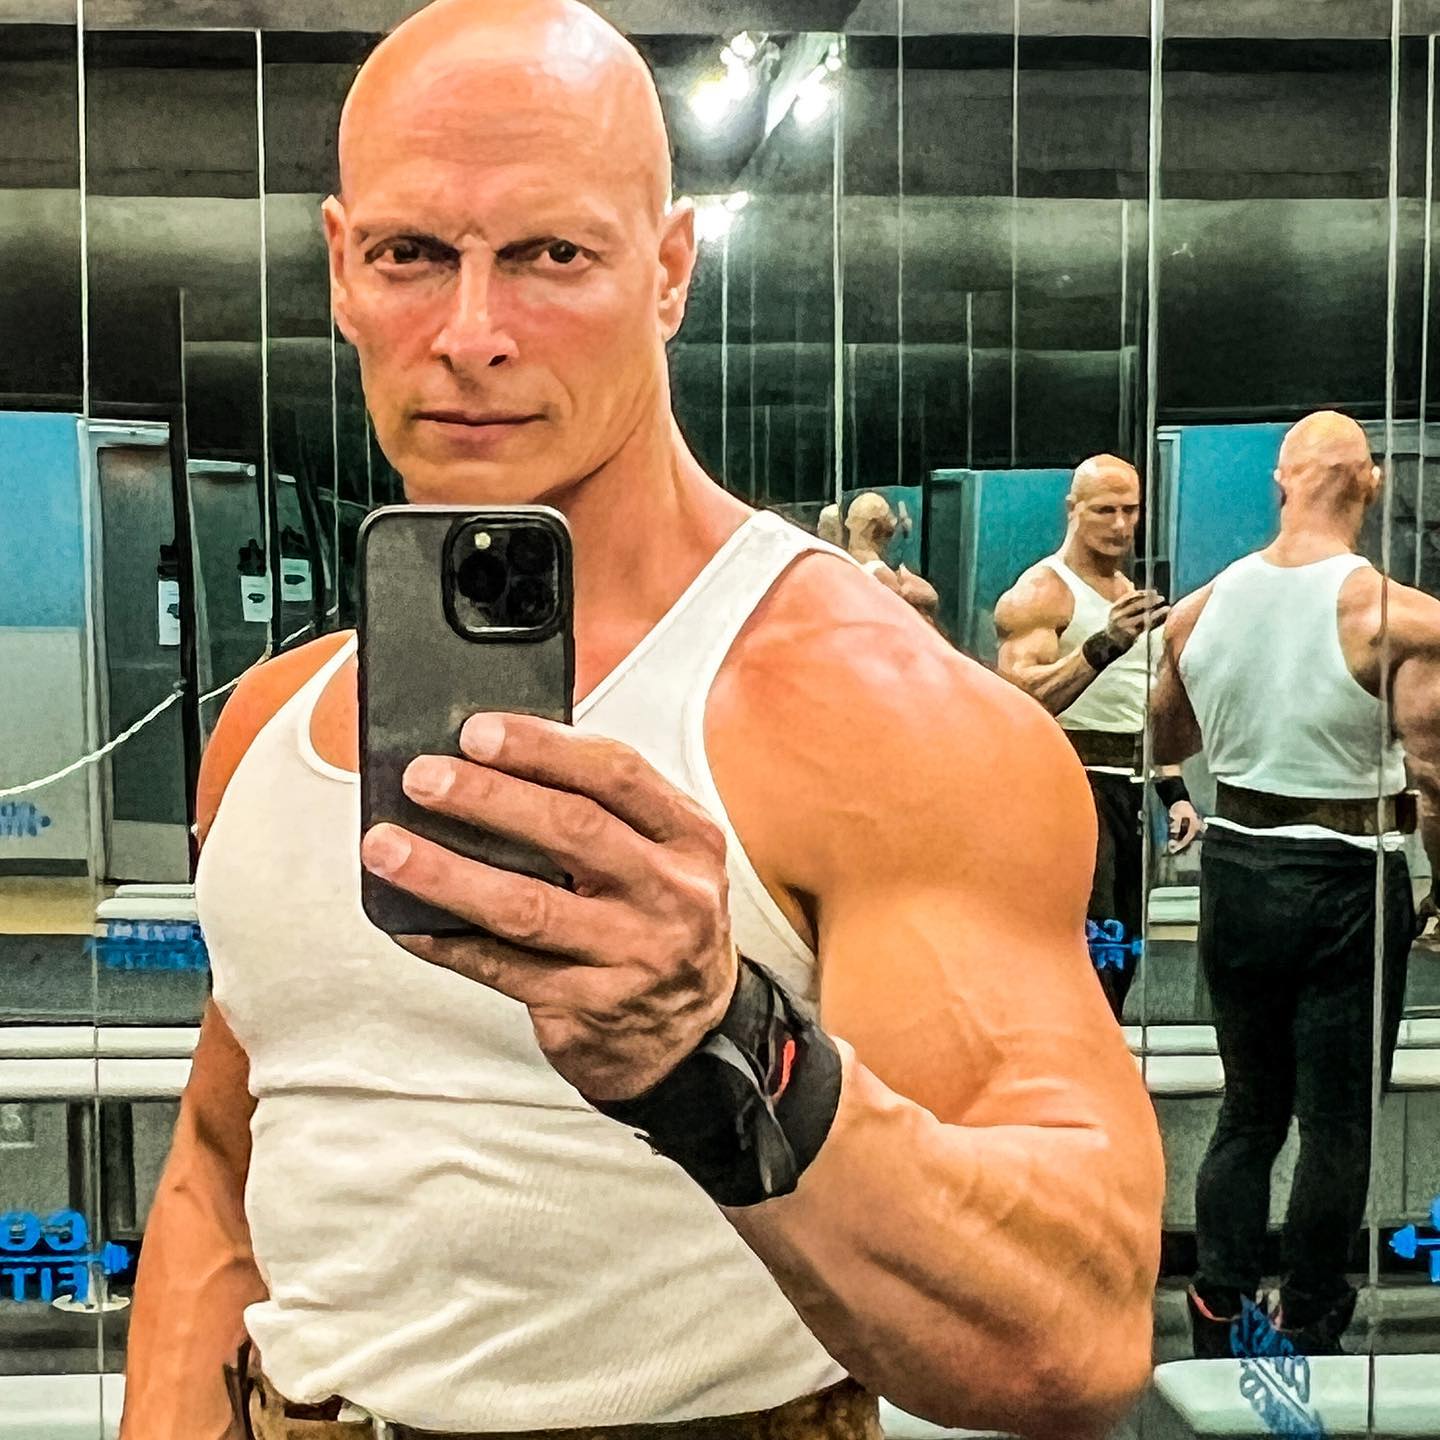 Joseph Gatt Arrested For Sexually Explicit Chats With Minor